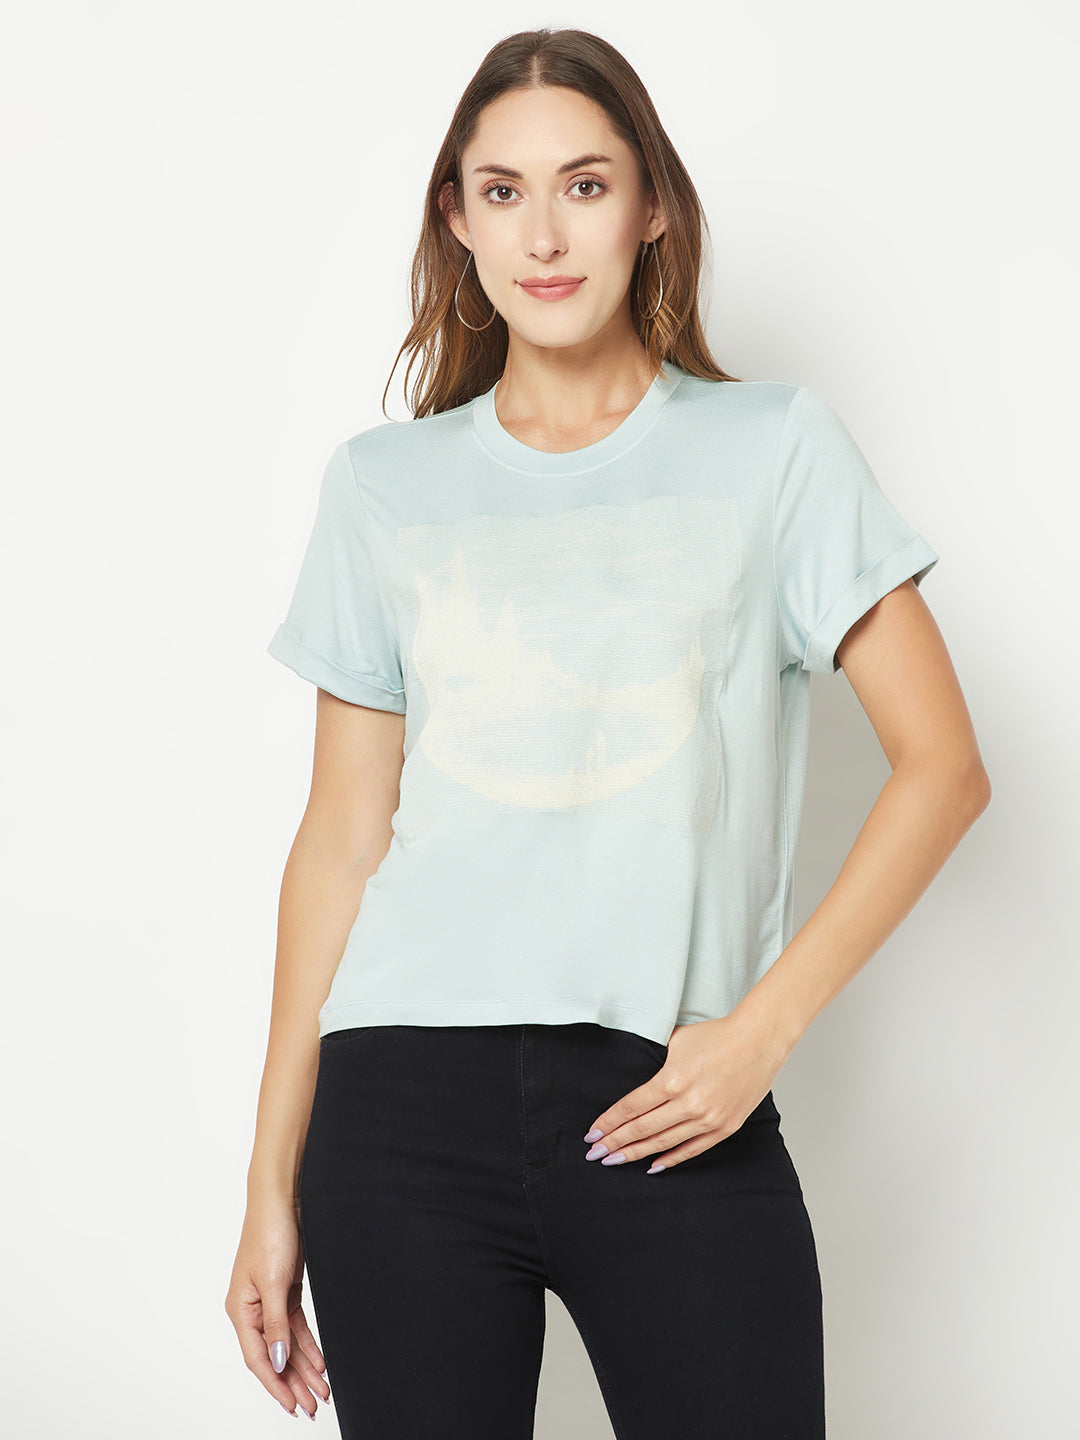 Embroidered blue t-shirt